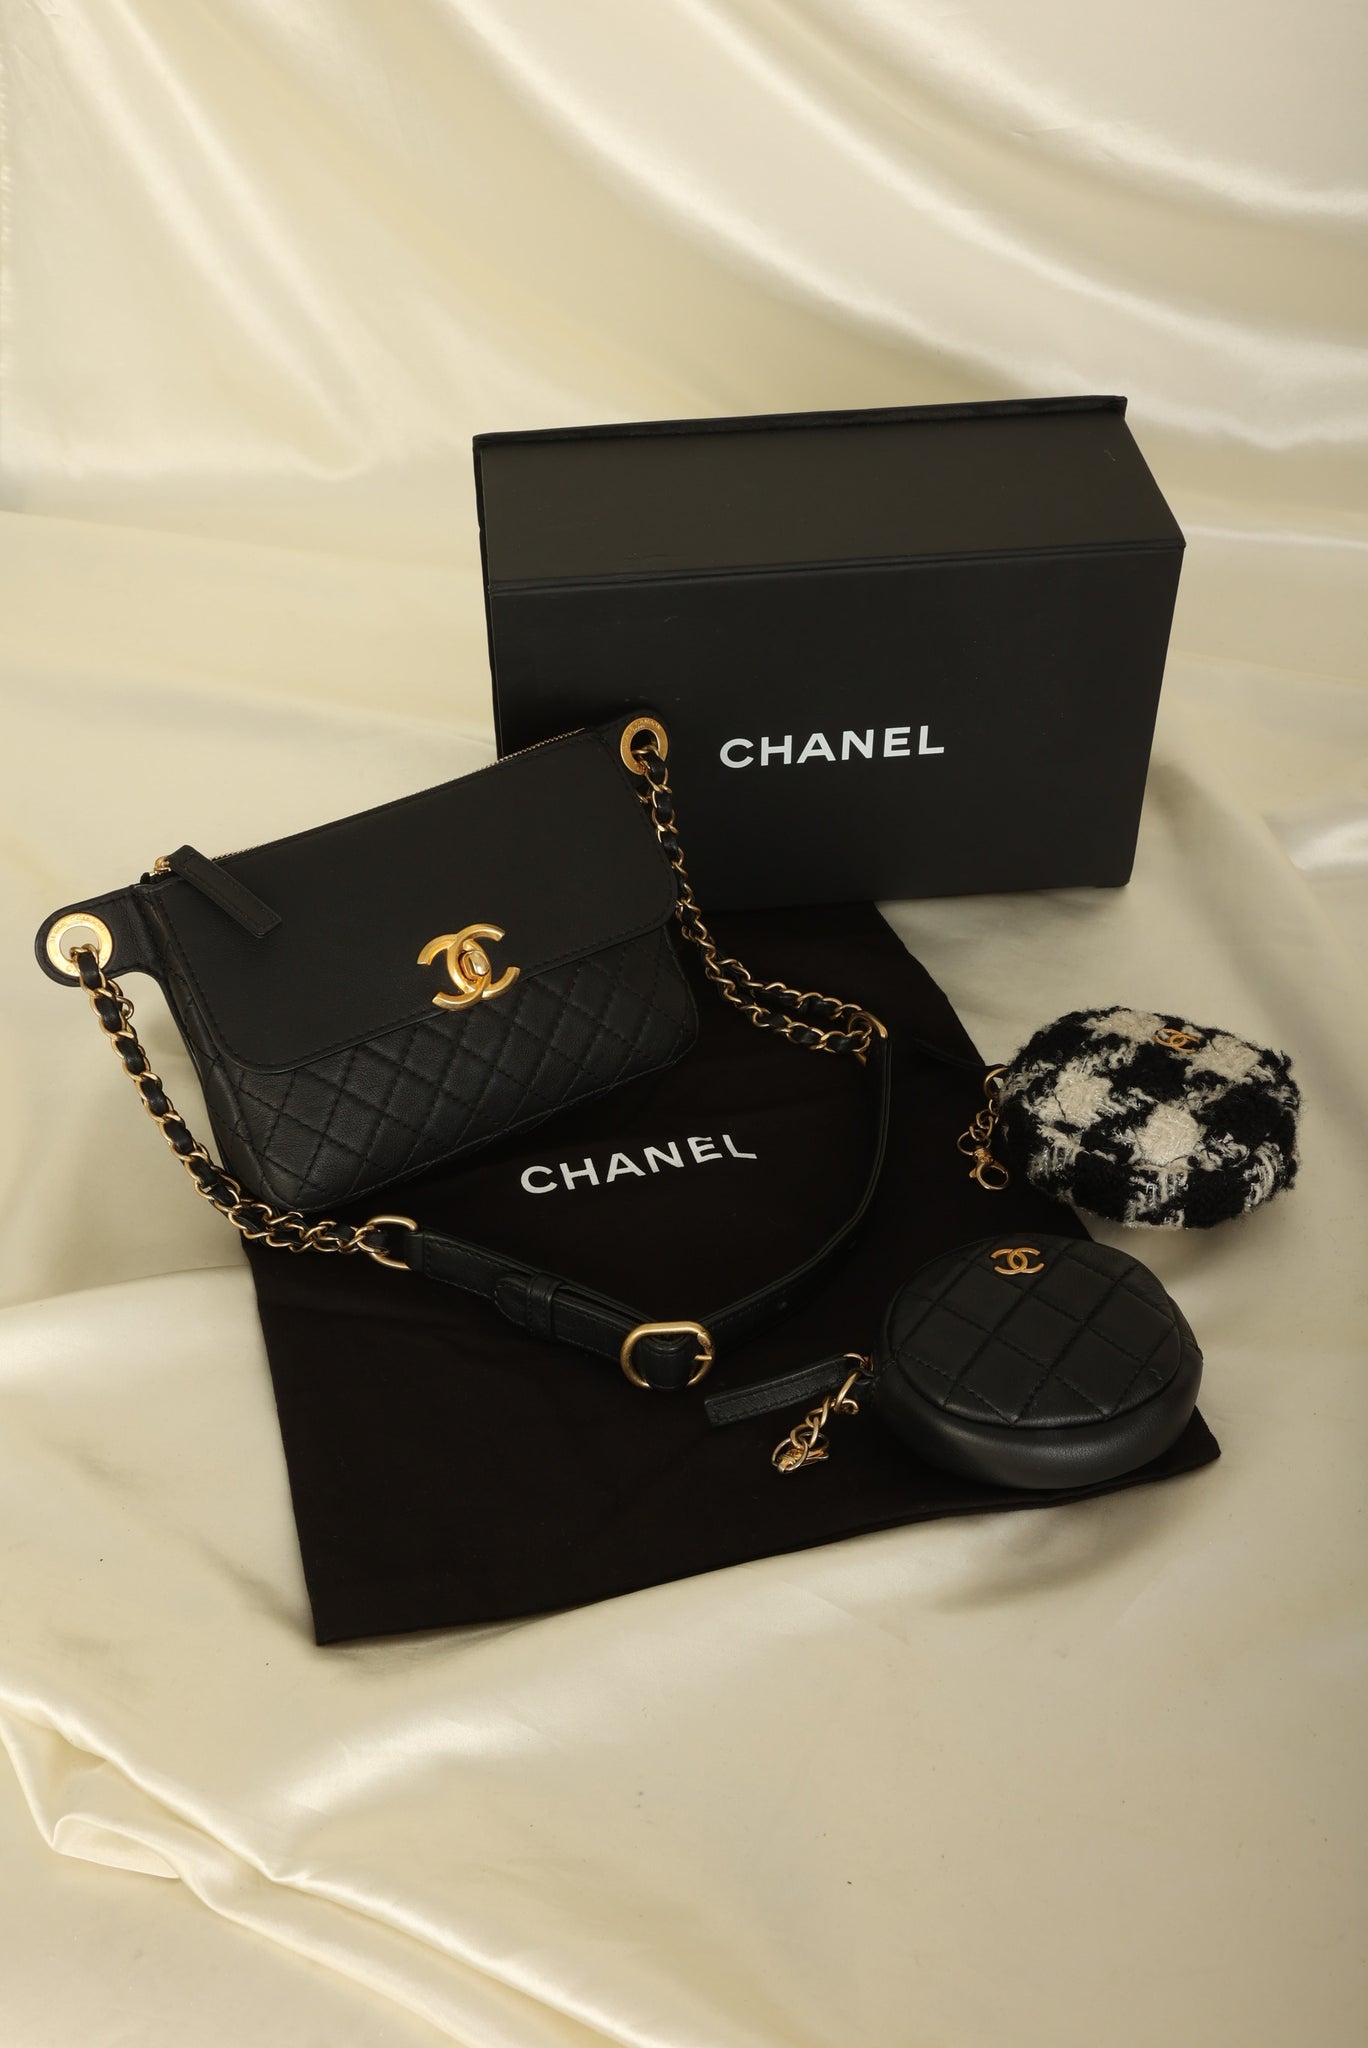 CHANEL, Bags, Chanel Vip Gift Bag Wallet Coin Pouch New